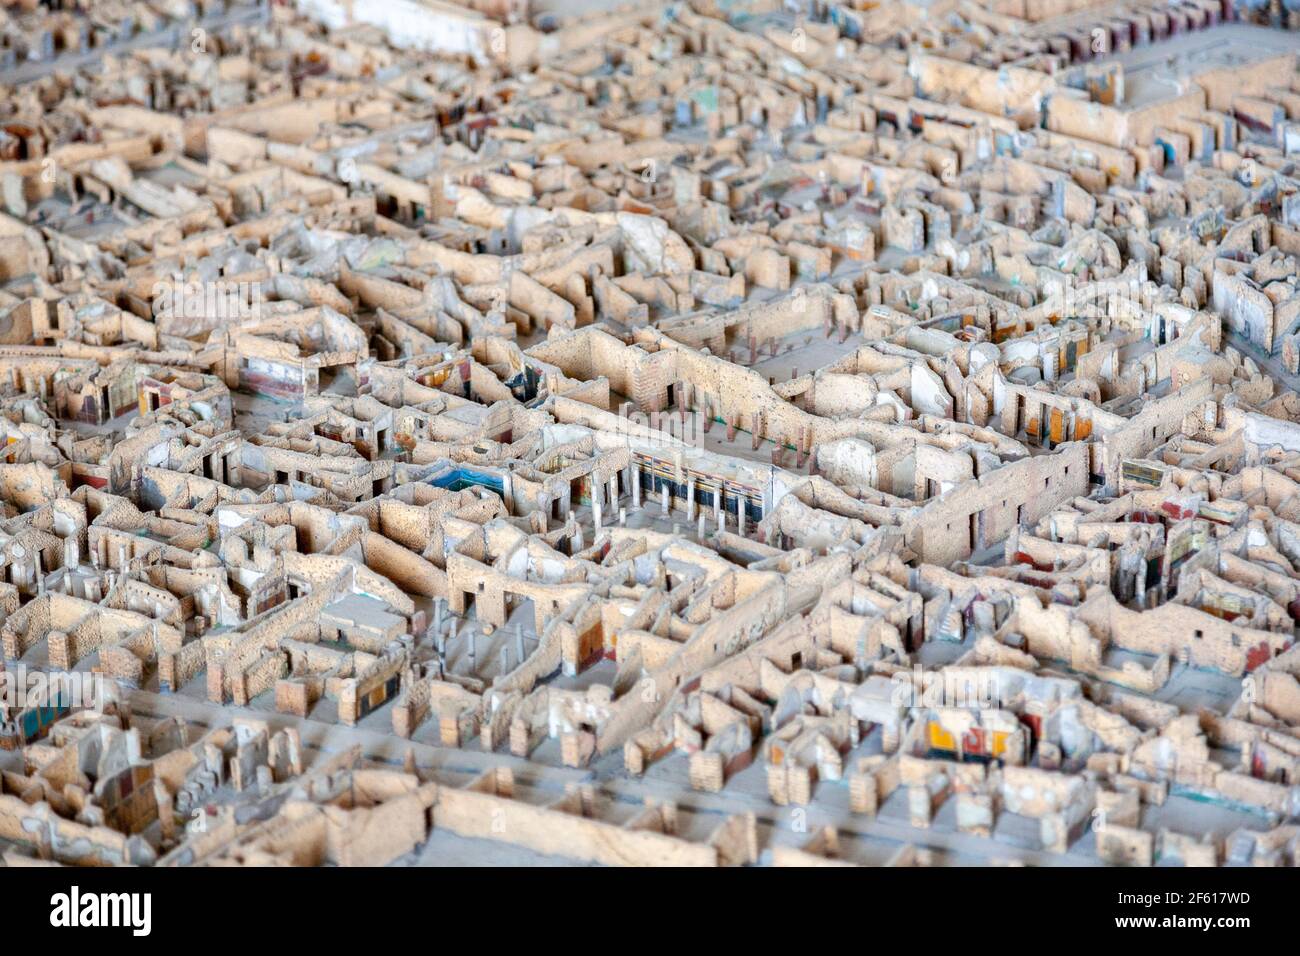 A scale model of the streets and ruined buildings of Pompeii in the Naples Archaeological Museum, Italy Stock Photo